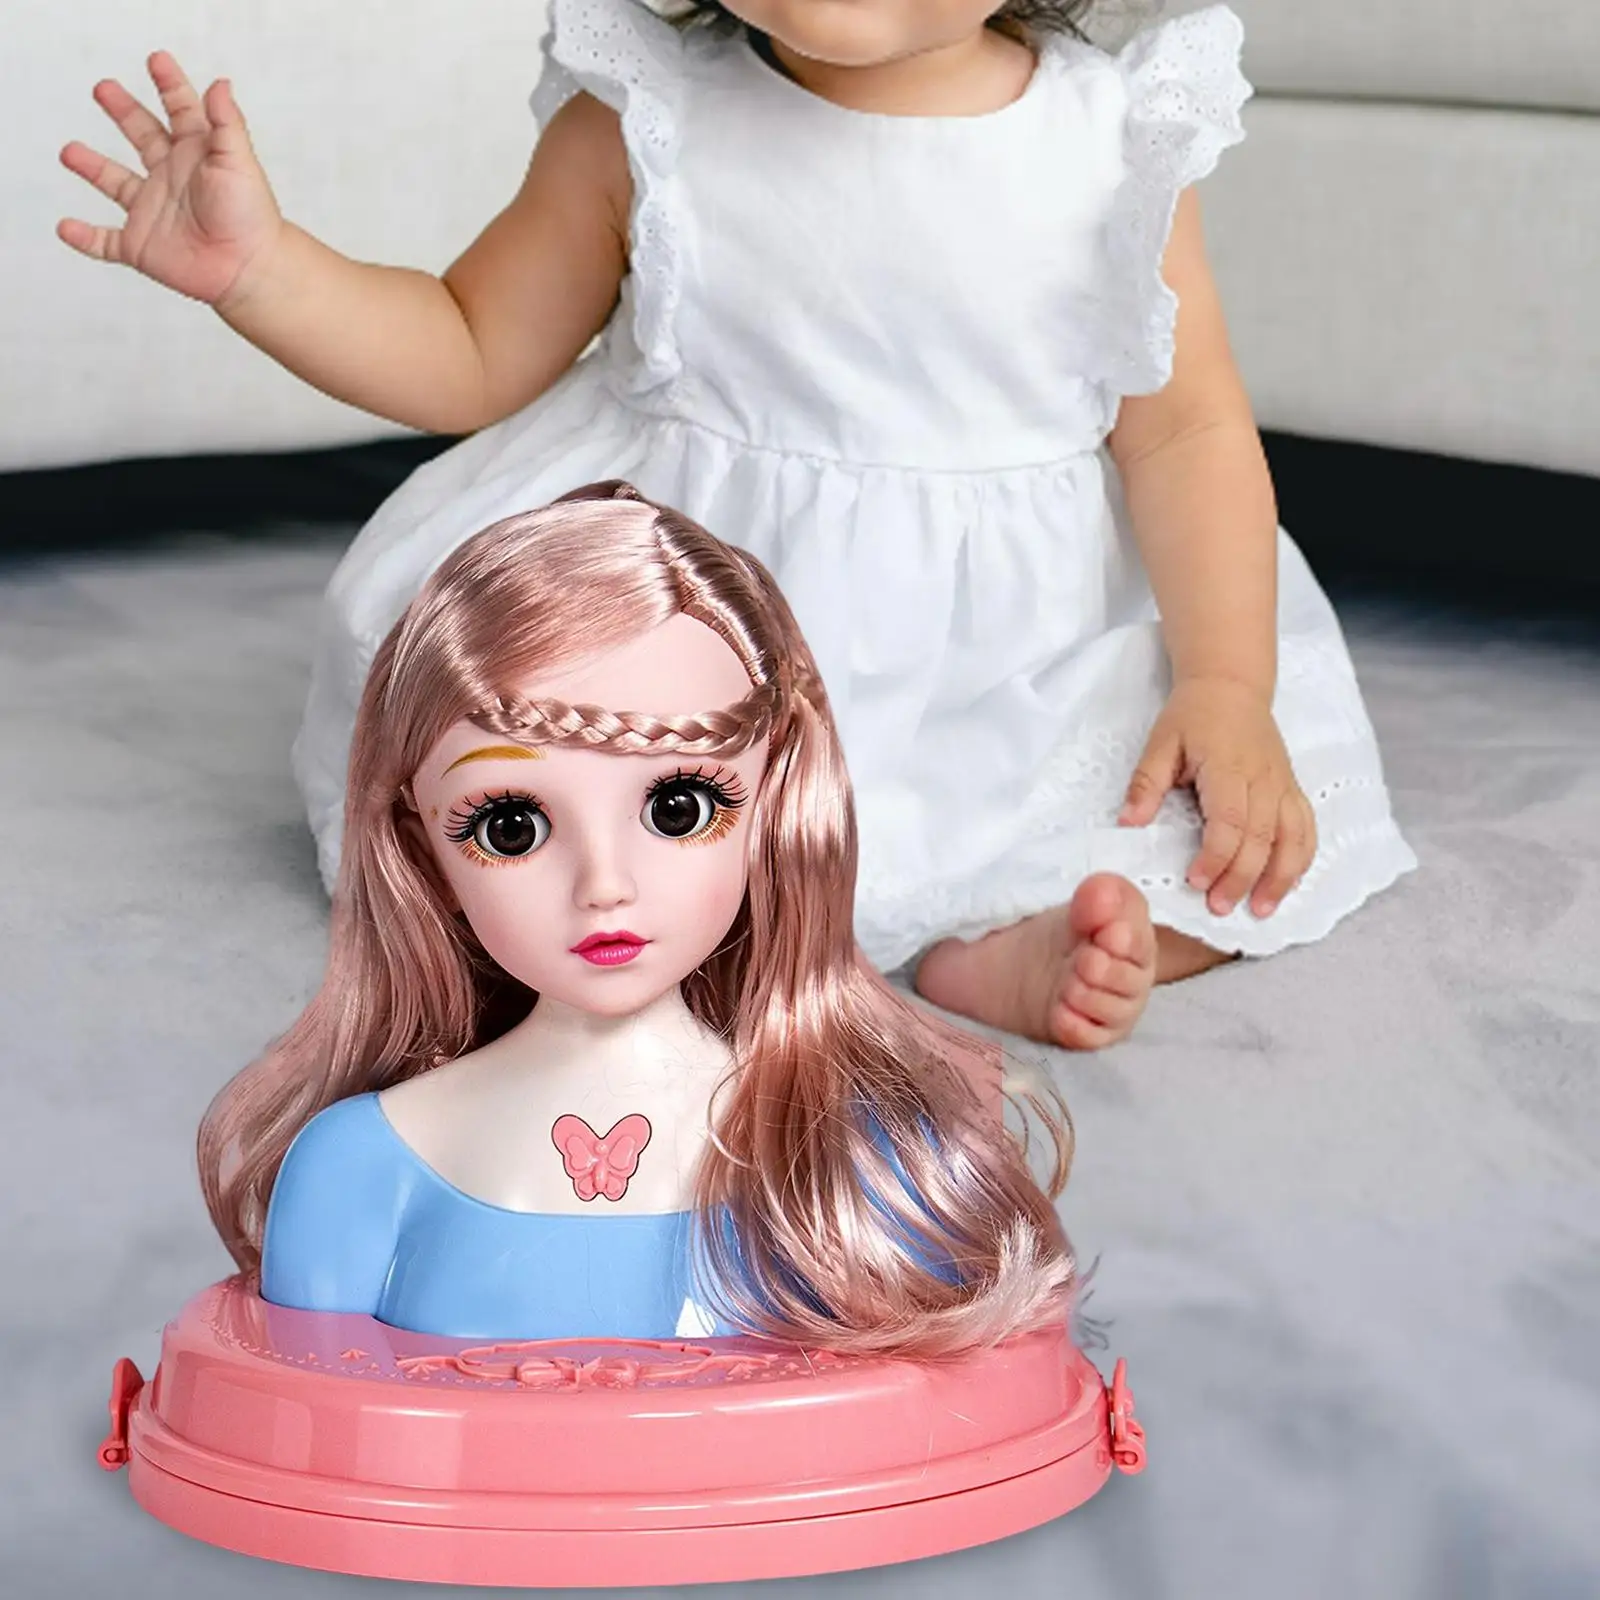 Fashion Doll Styling Head Toy Playset Princess Doll Movable Eyelids Makeup Dolls for Teens Adults Children Kids Birthday Gifts